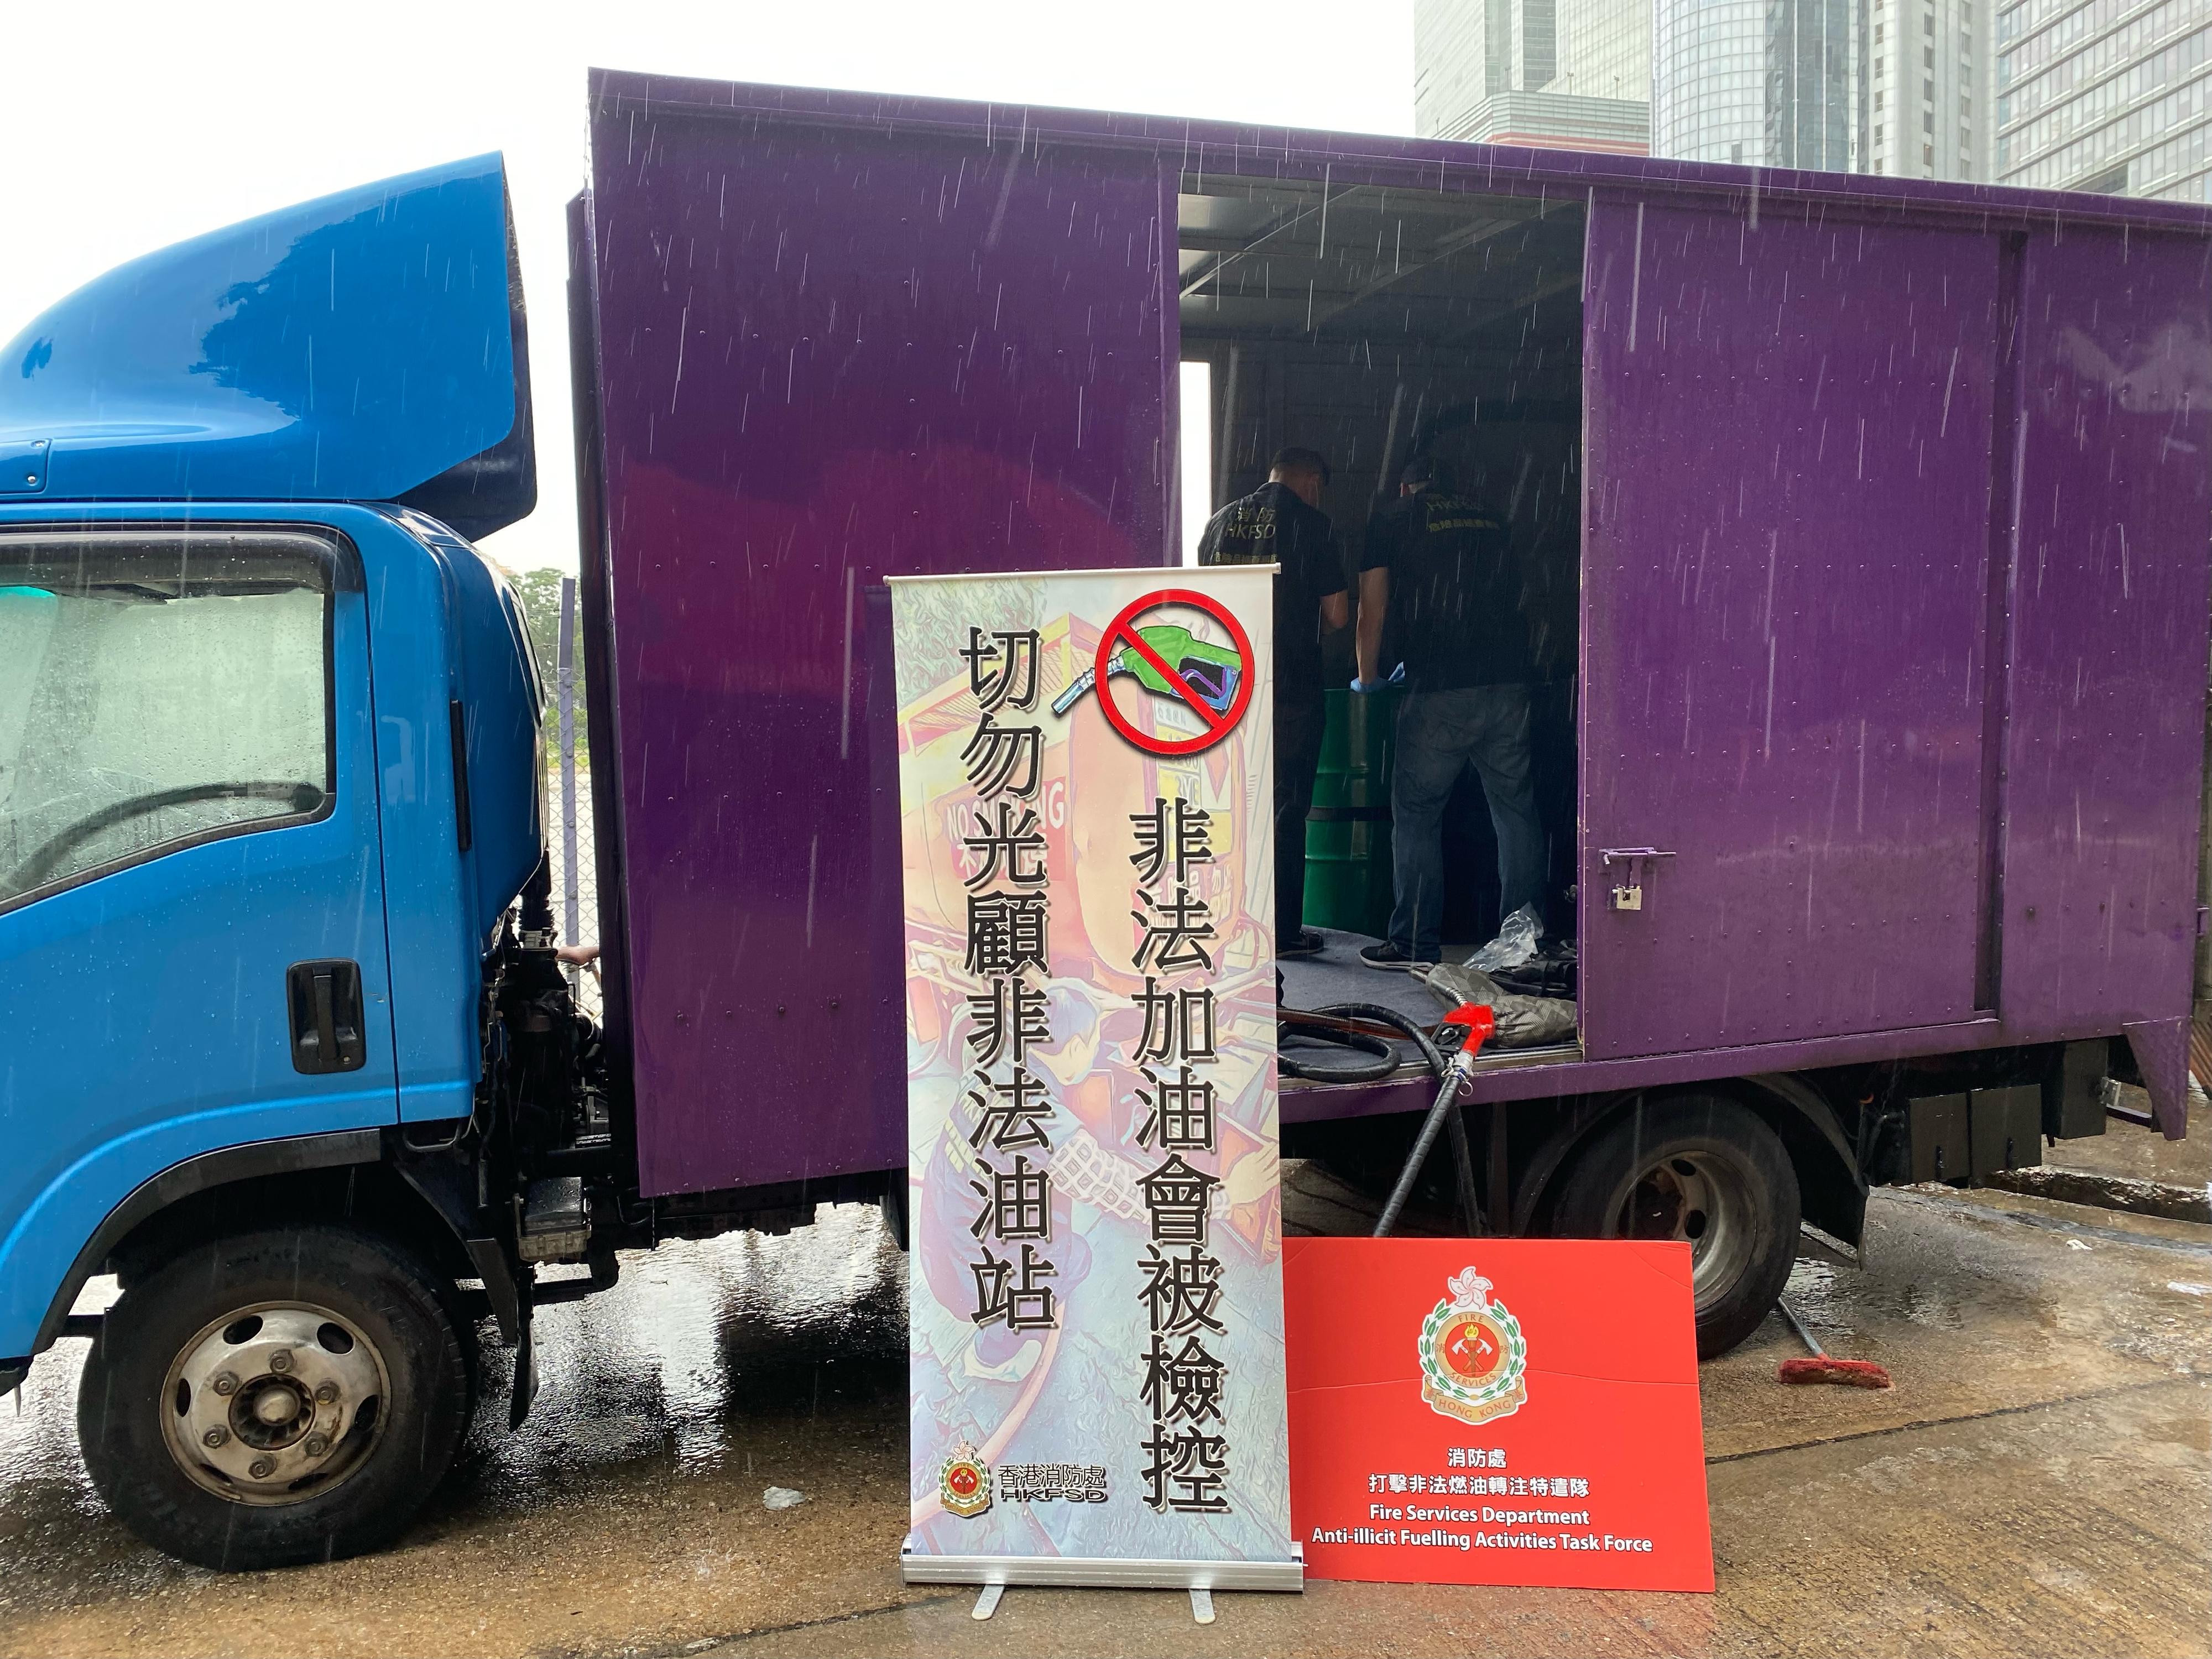 The Fire Services Department, the Hong Kong Police Force and Hong Kong Customs mounted a territory-wide joint operation codenamed "Crescent" from June 7 to 9 to combat illicit fuelling activities. Photo shows a light goods vehicle suspected to be involved in illicit fuelling activities.